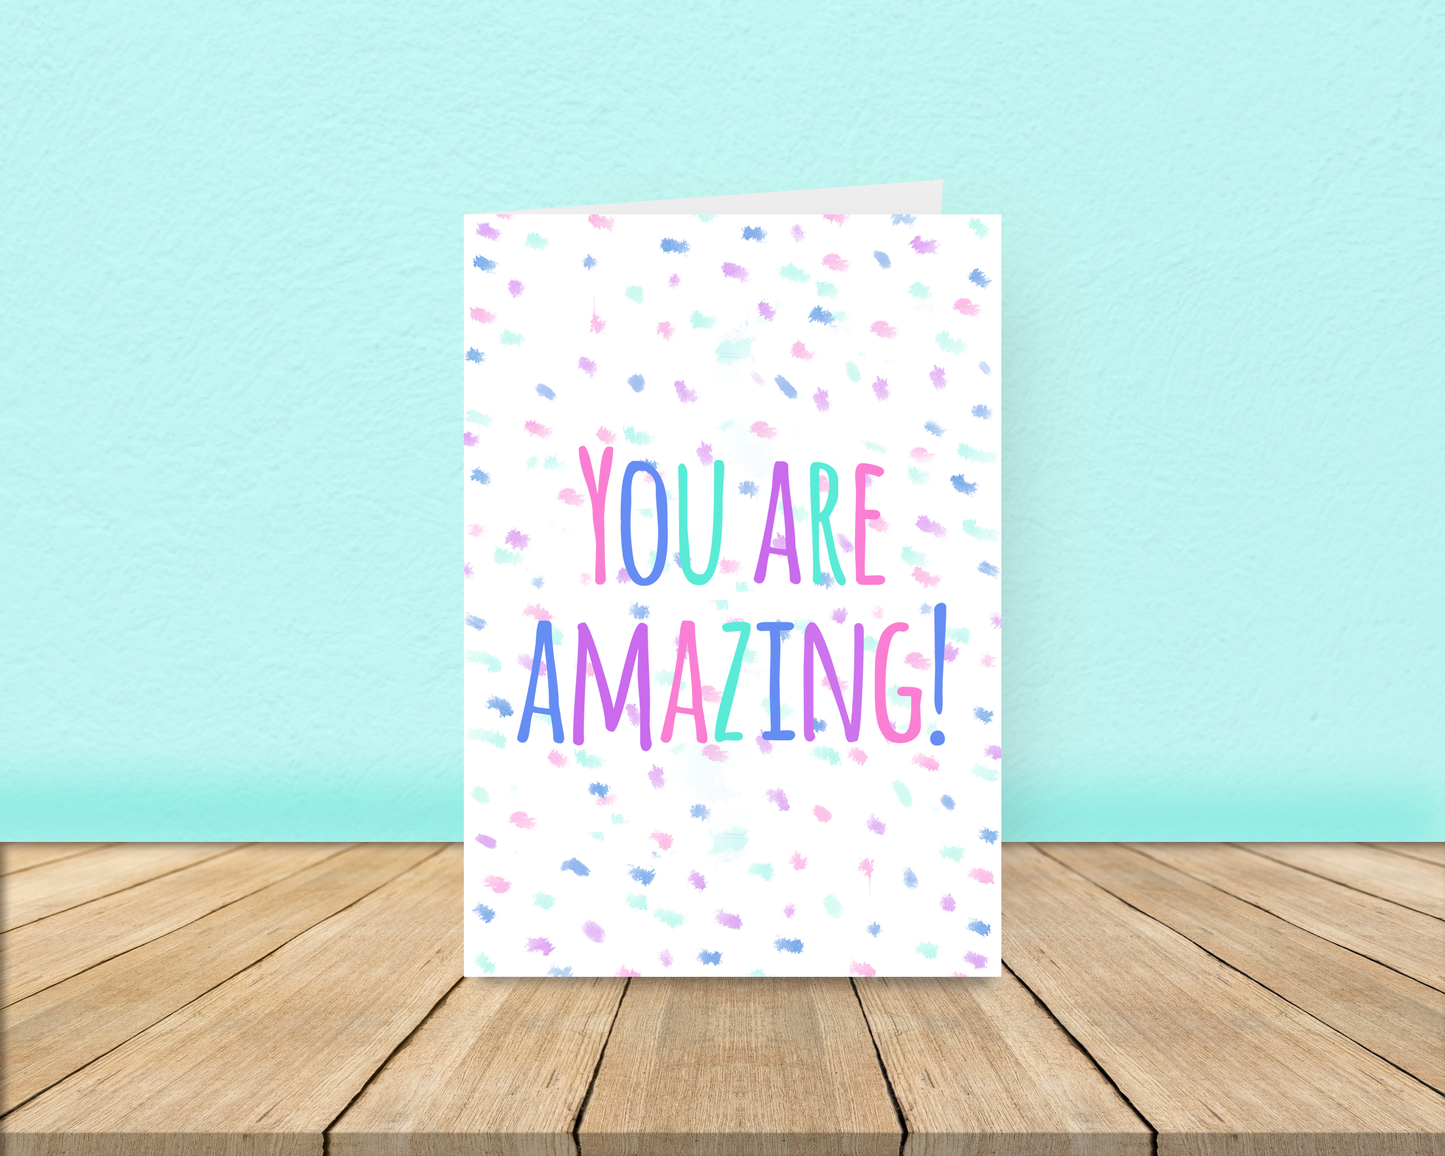 You are Amazing!